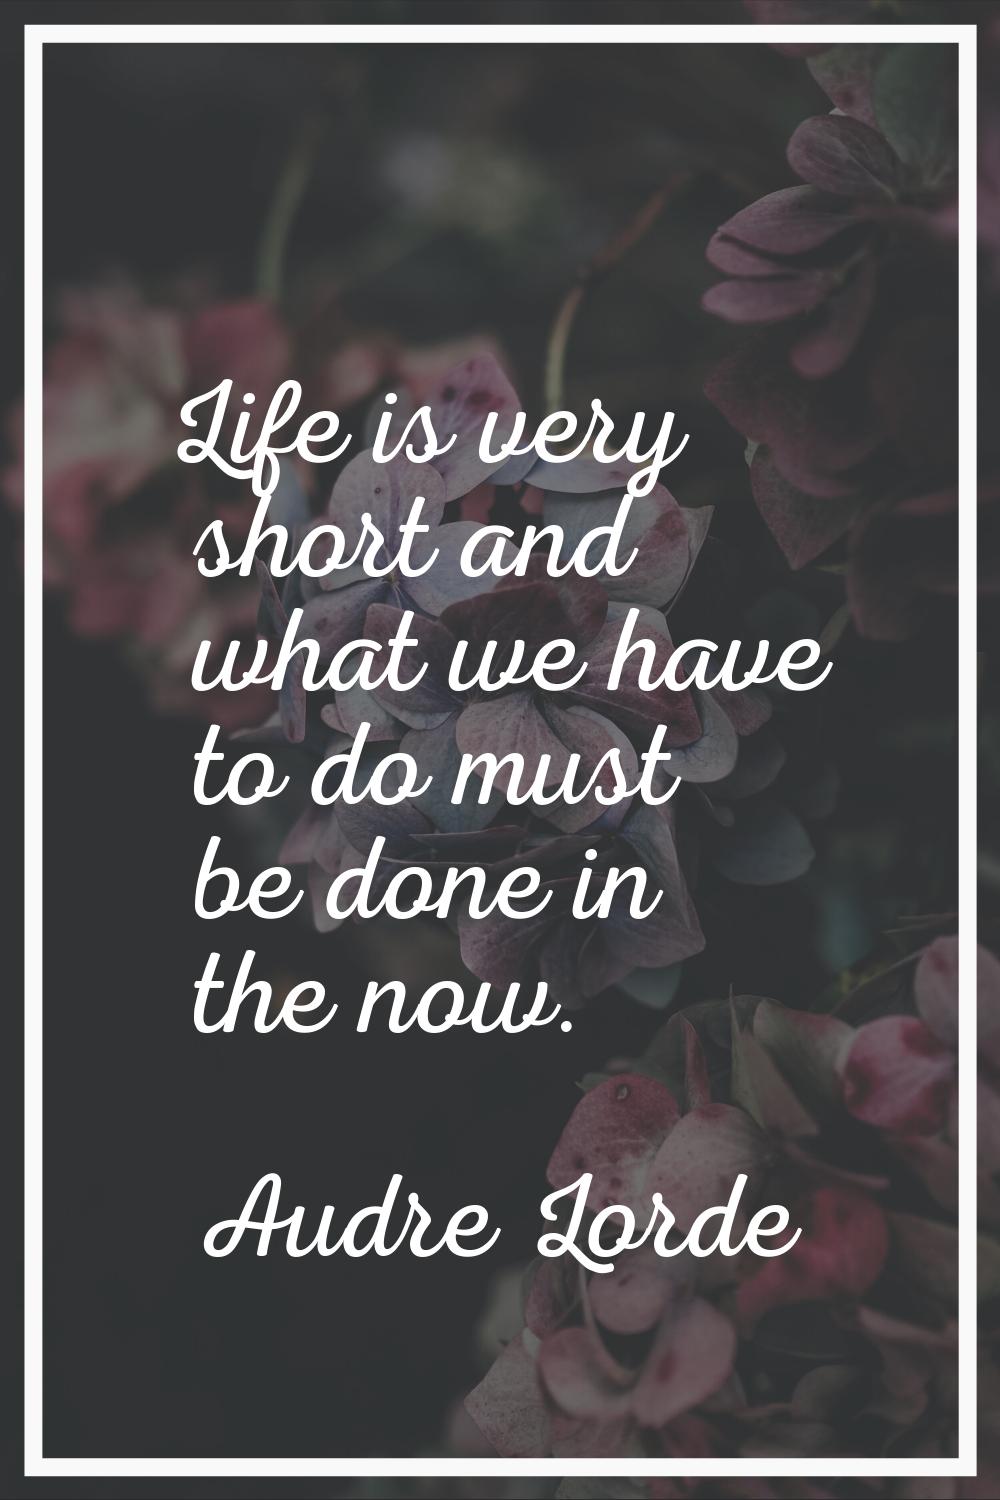 Life is very short and what we have to do must be done in the now.